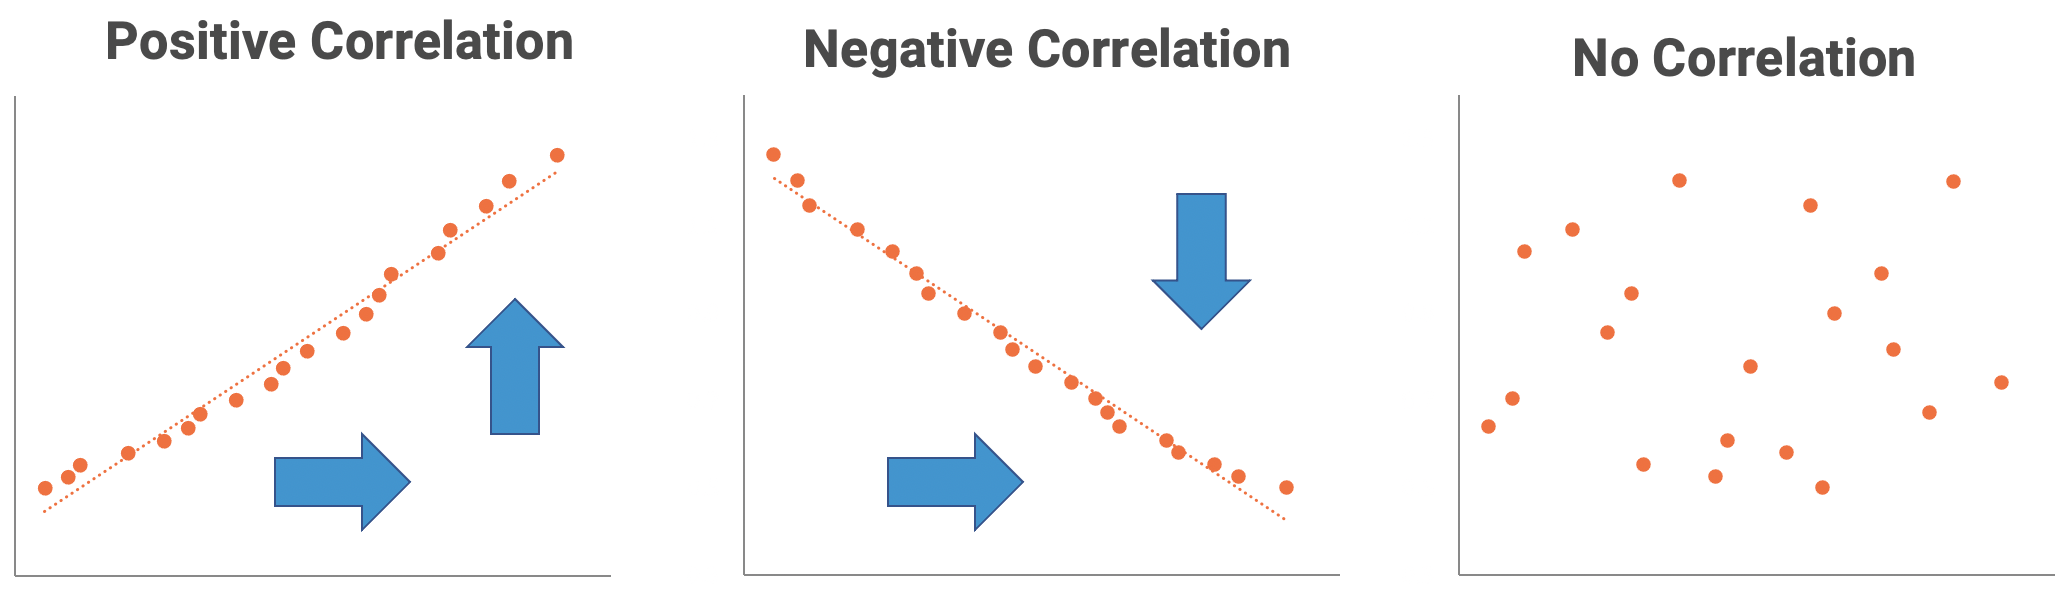 how are correlation and causation similar